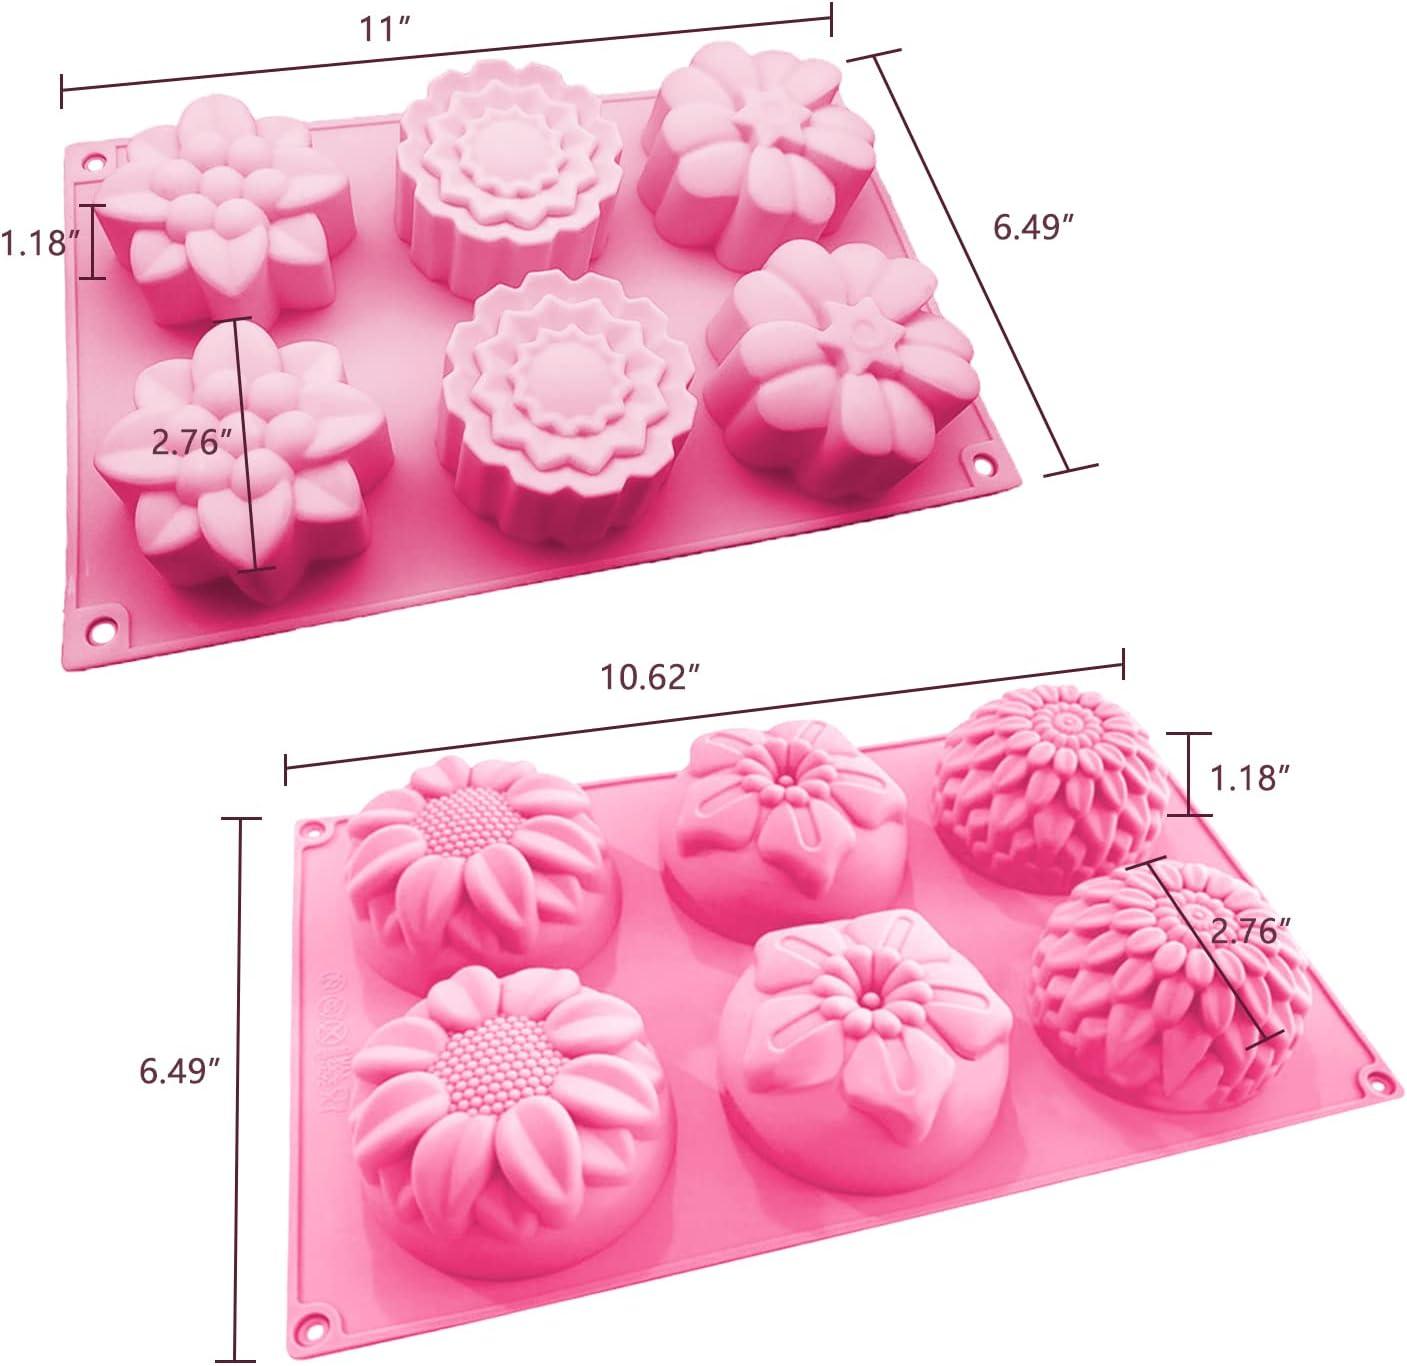 Pretty Flower Soap Mold Flower Silicone Soap Making Molds